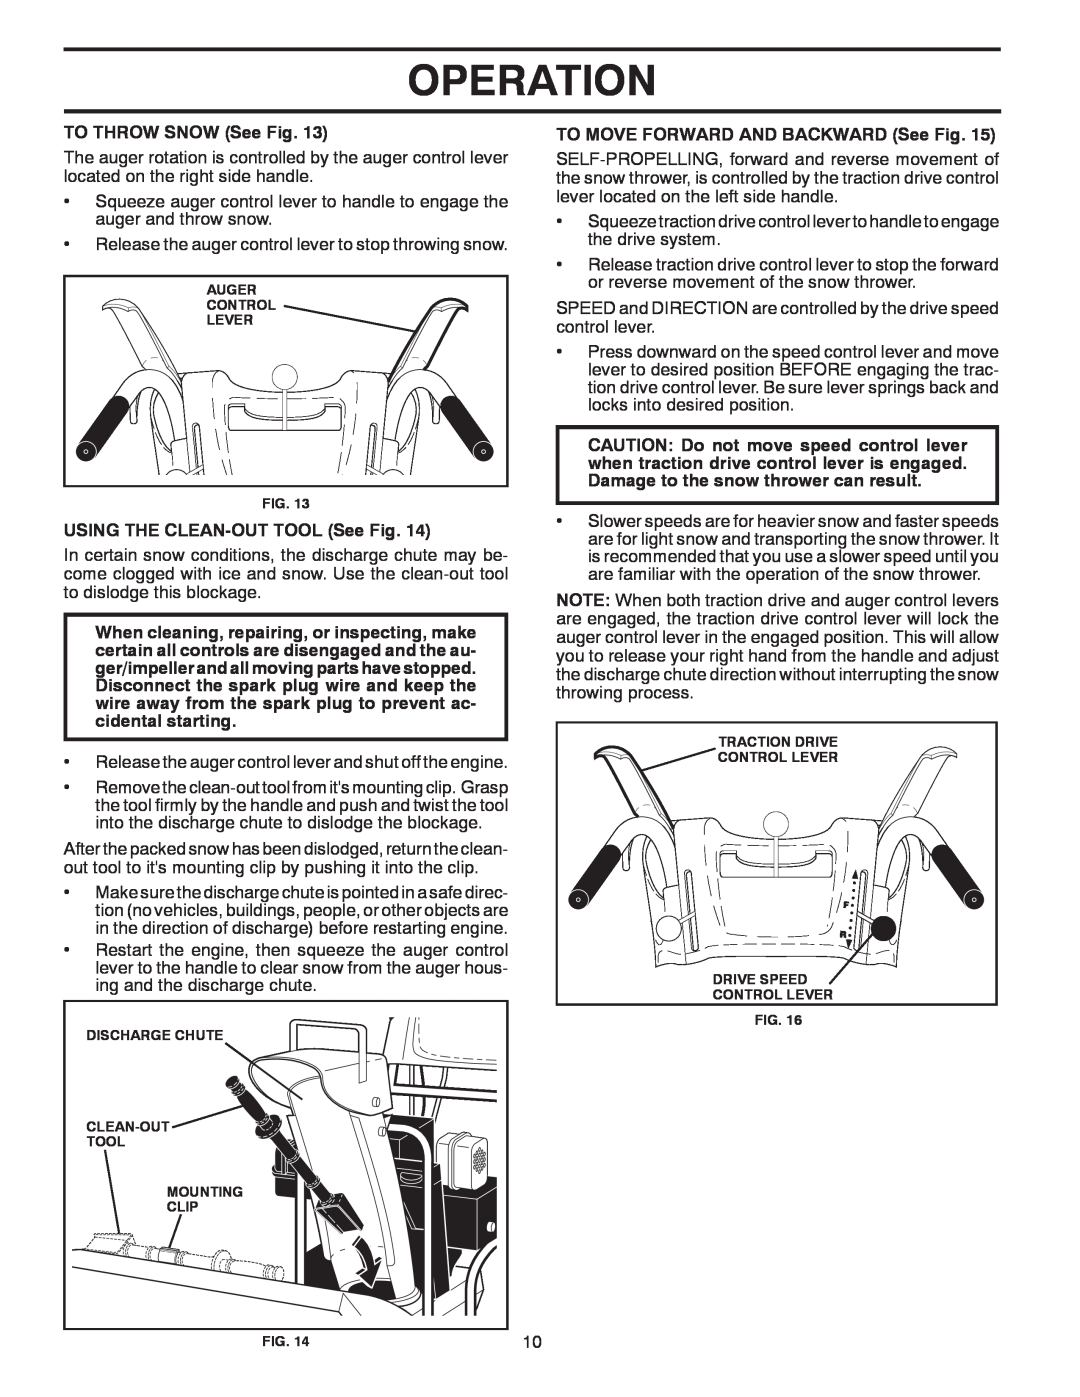 McCulloch 96192004101 owner manual Operation, TO THROW SNOW See Fig, USING THE CLEAN-OUT TOOL See Fig 